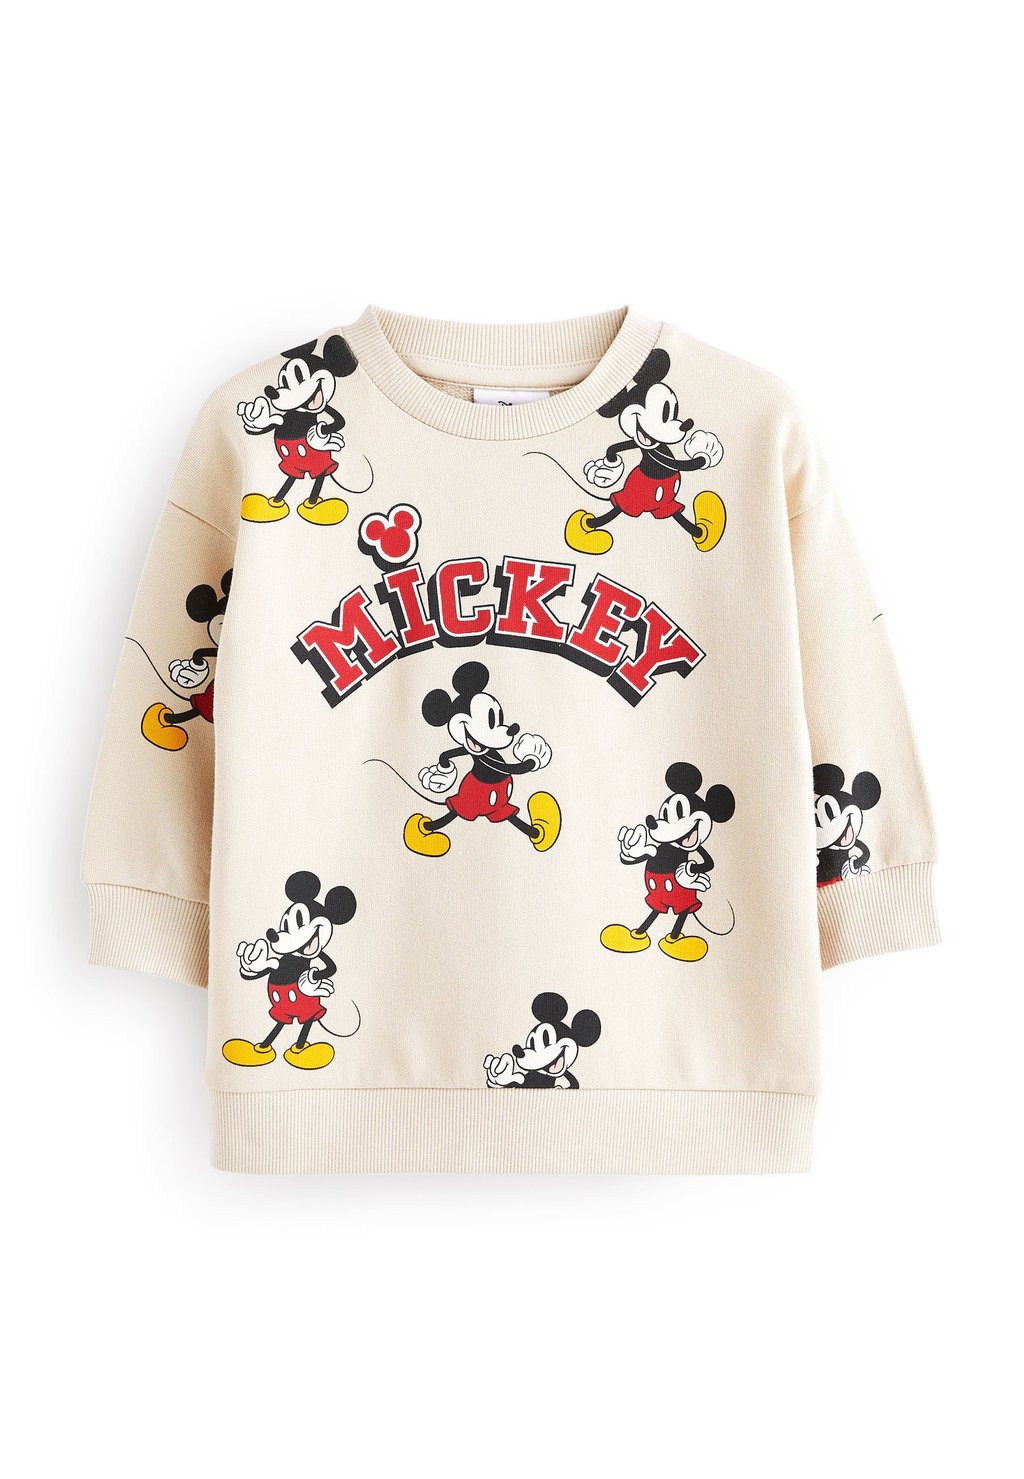 Толстовка ALL OVER PRINT MICKEY Next, цвет neutral cream шорты all over printed t shirt and shorts license set next цвет neutral tan mickey mouse